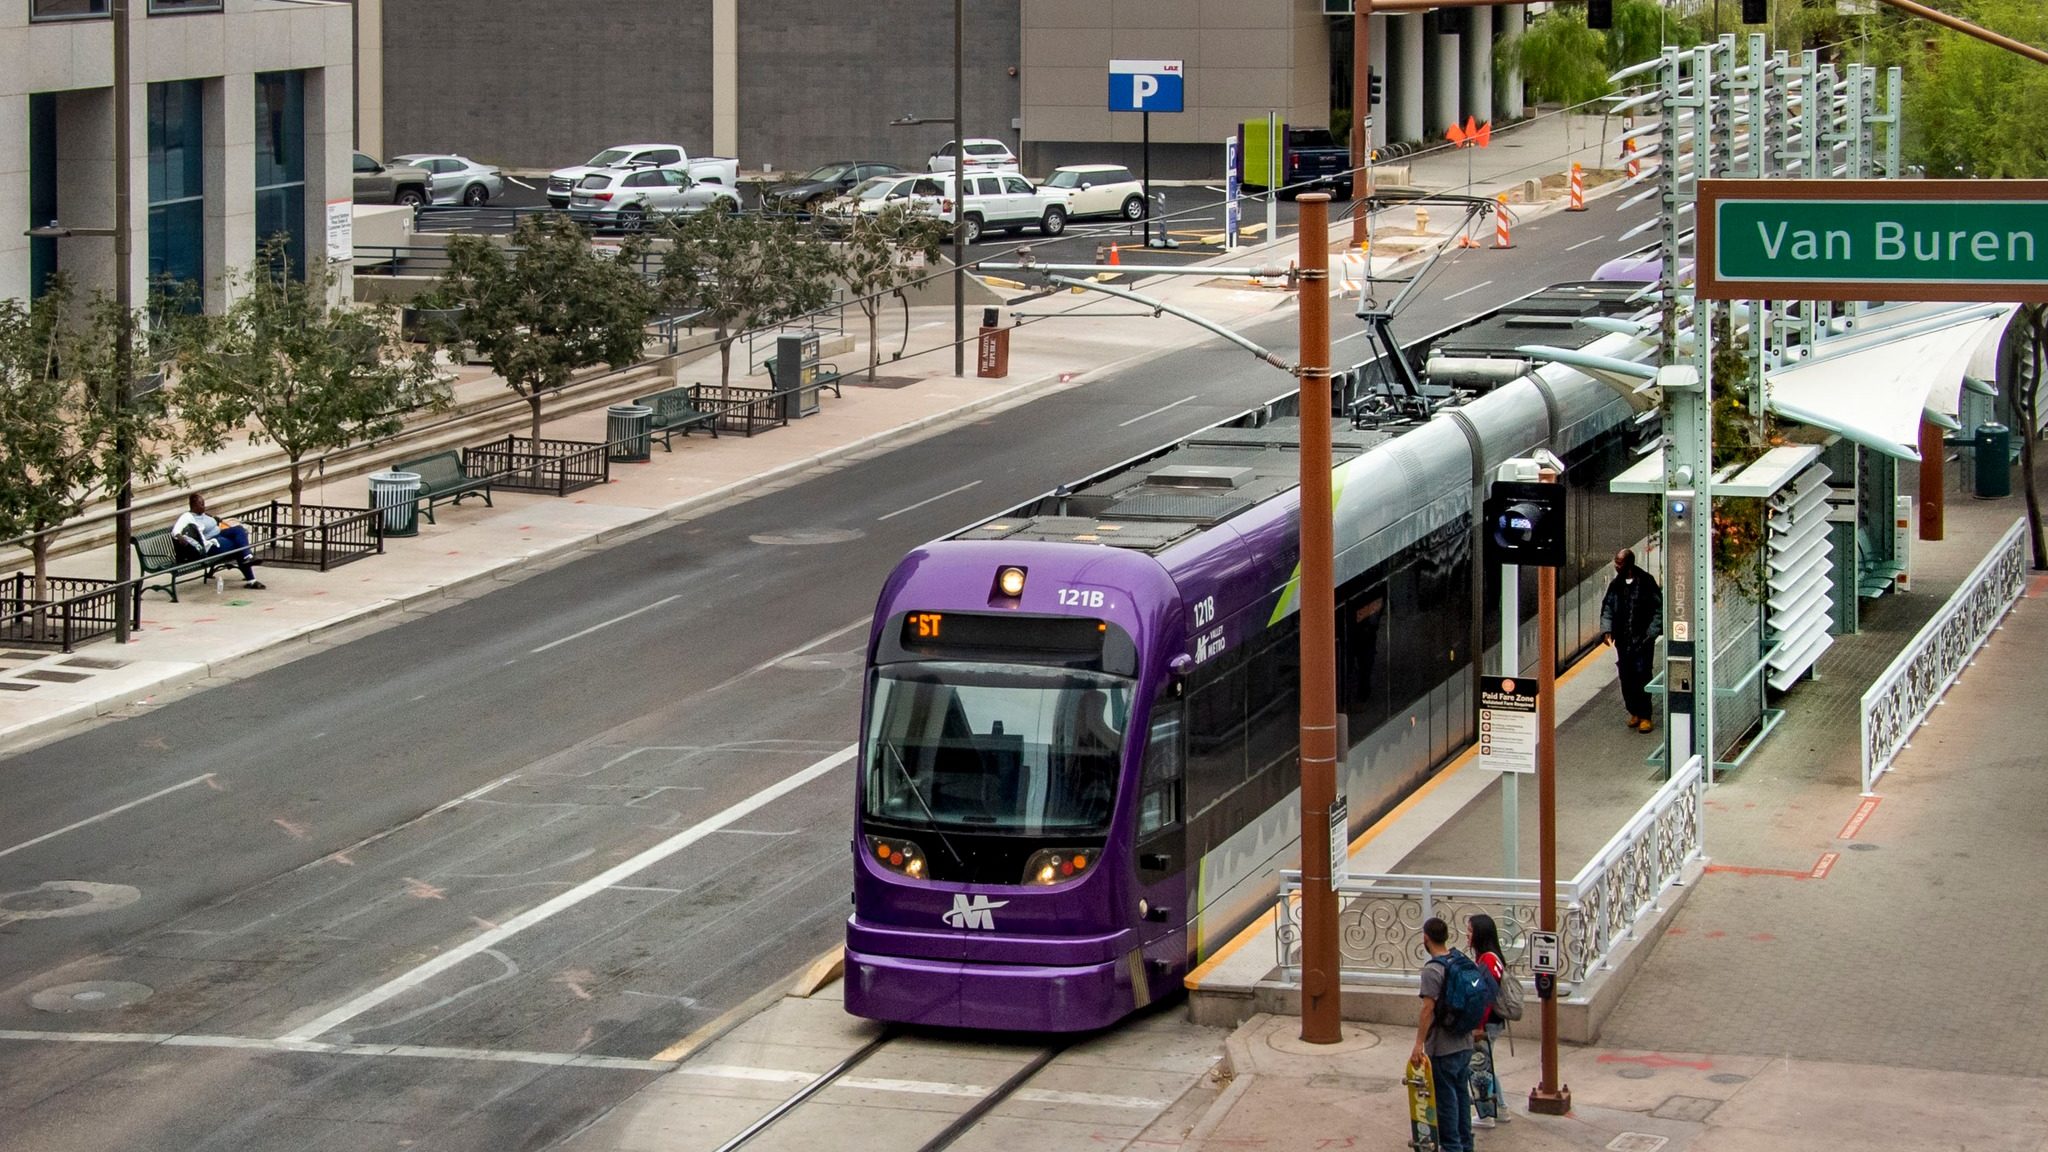 Suspect arrested after shooting on light rail in downtown Phoenix